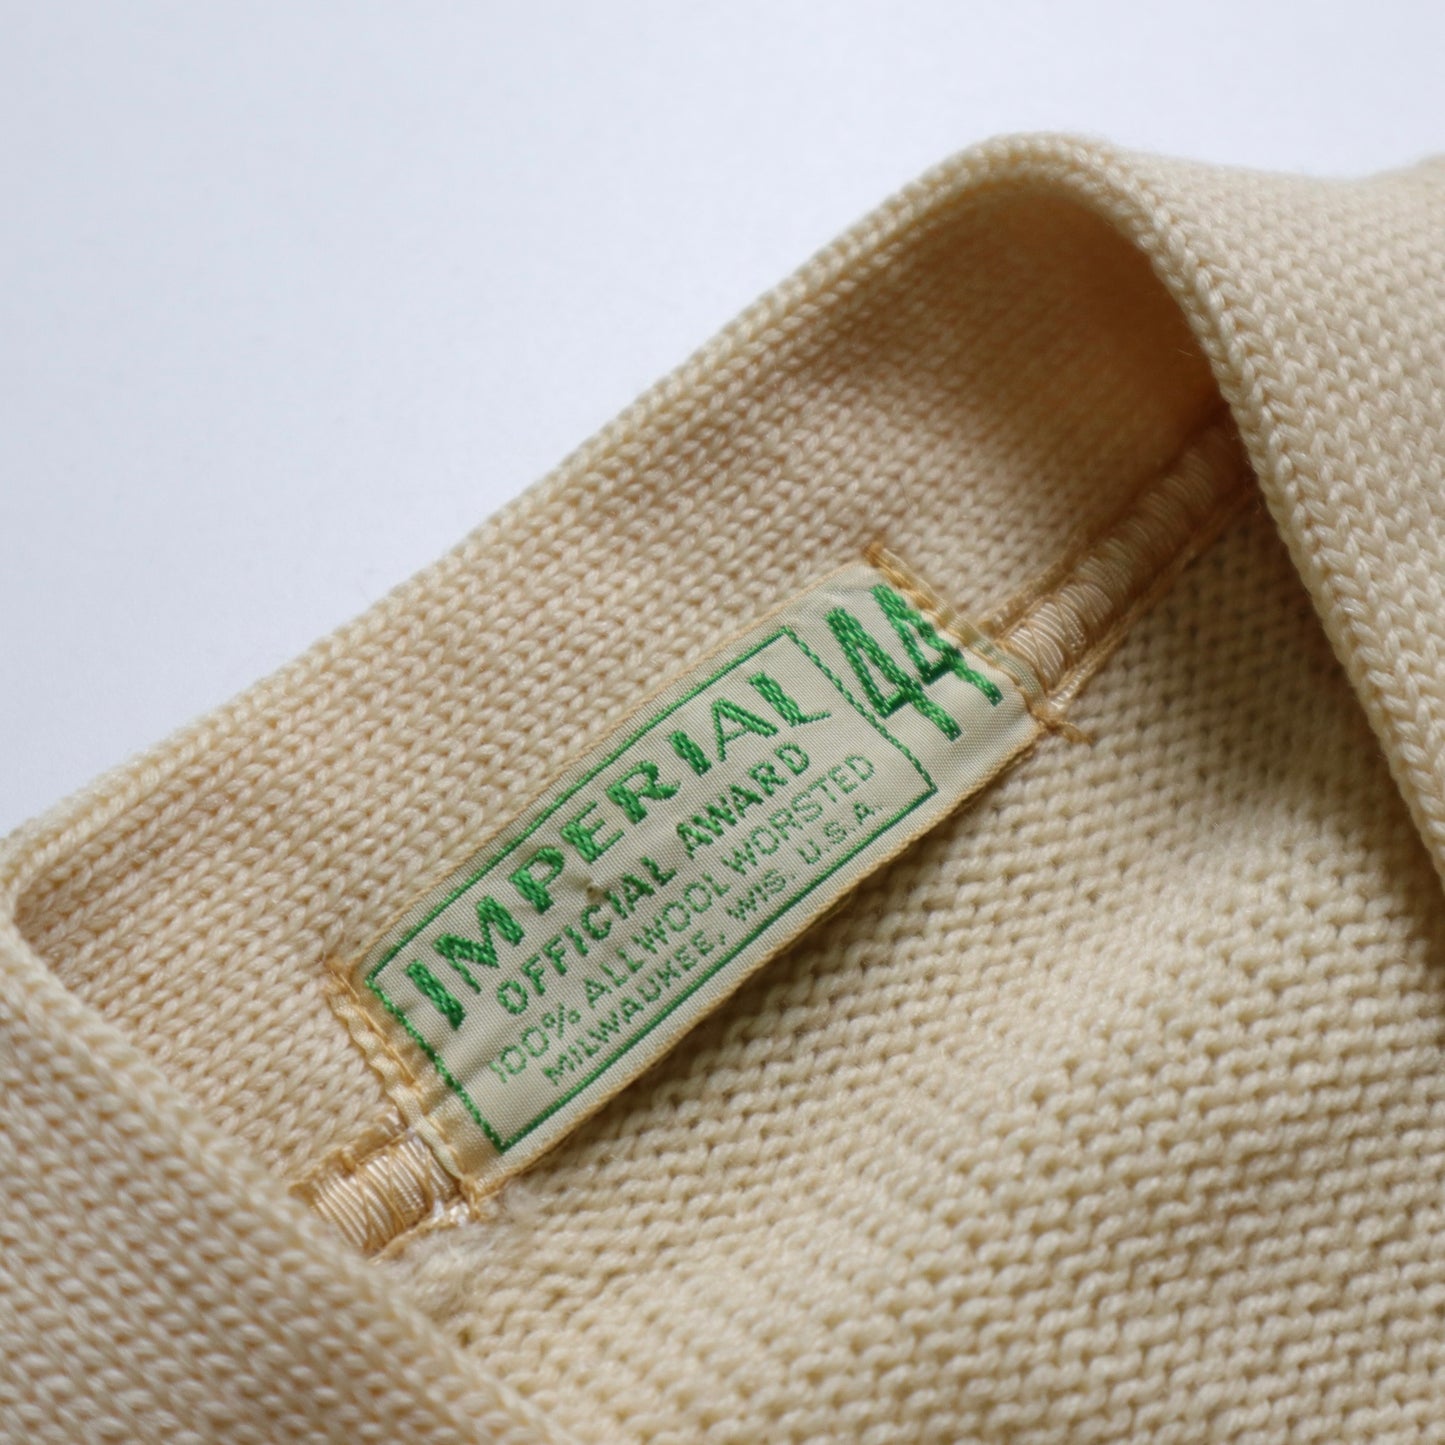 1950s IMPERIAL The Humane Society of the United States wool campus knitted jacket made in the United States